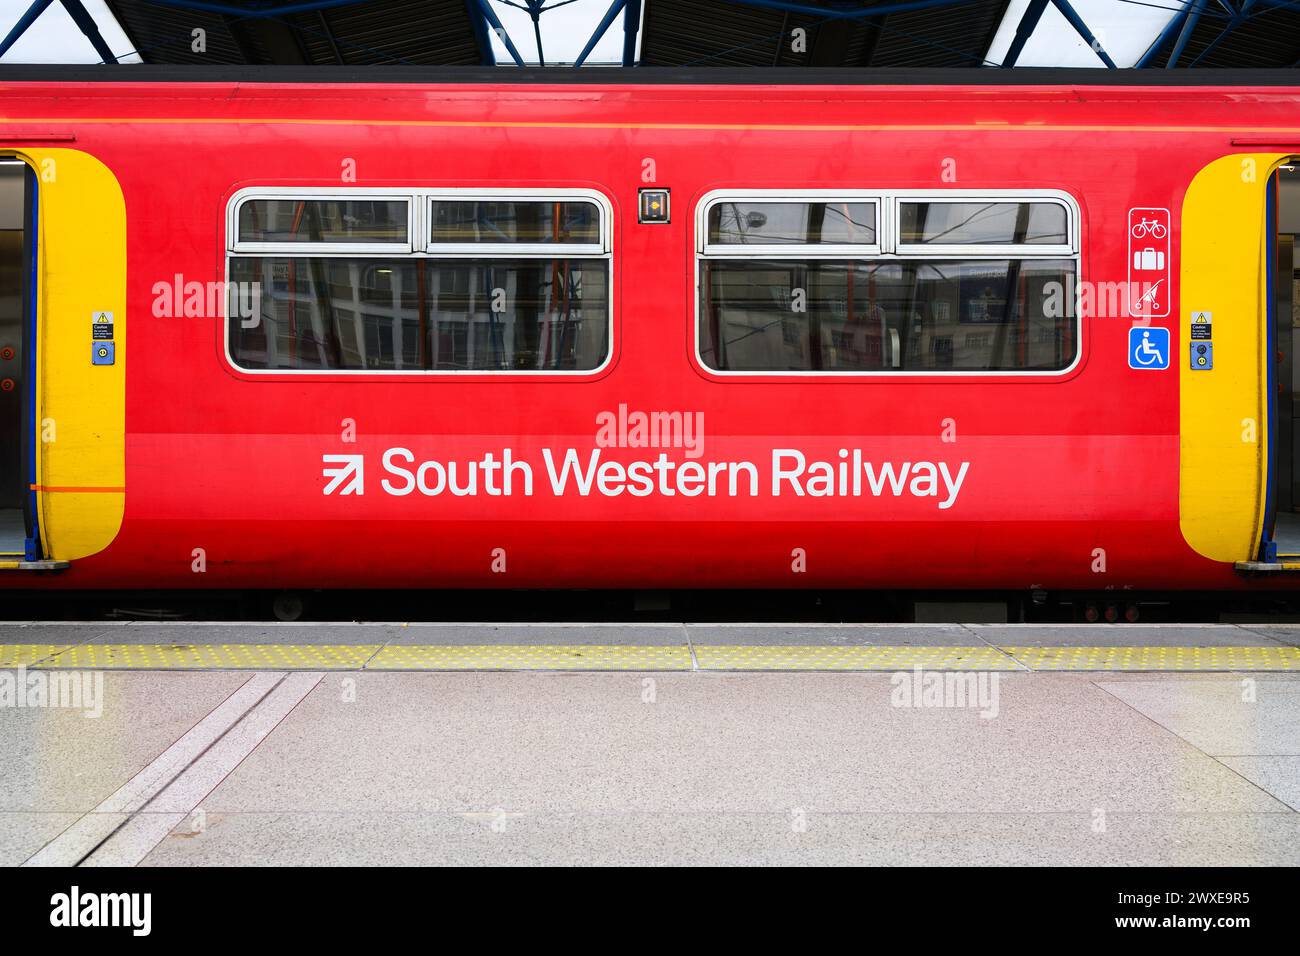 London, UK - March 25, 2024; South Western Railway train carriage with name and logo at platform in red with no people Stock Photo